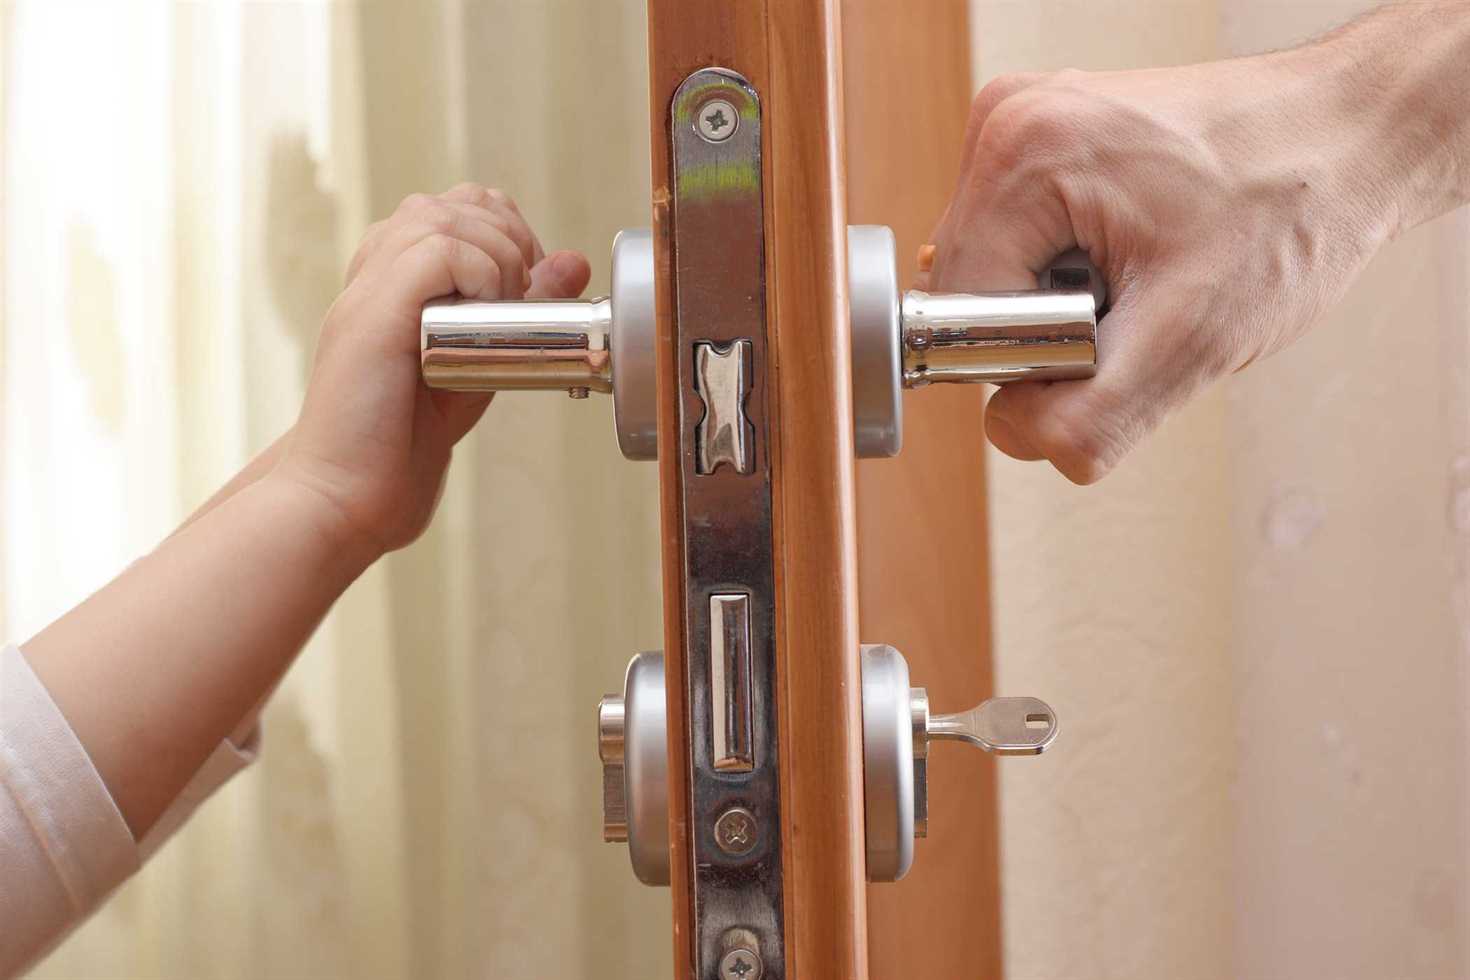 door lock. For the handle to hold an adult and a child